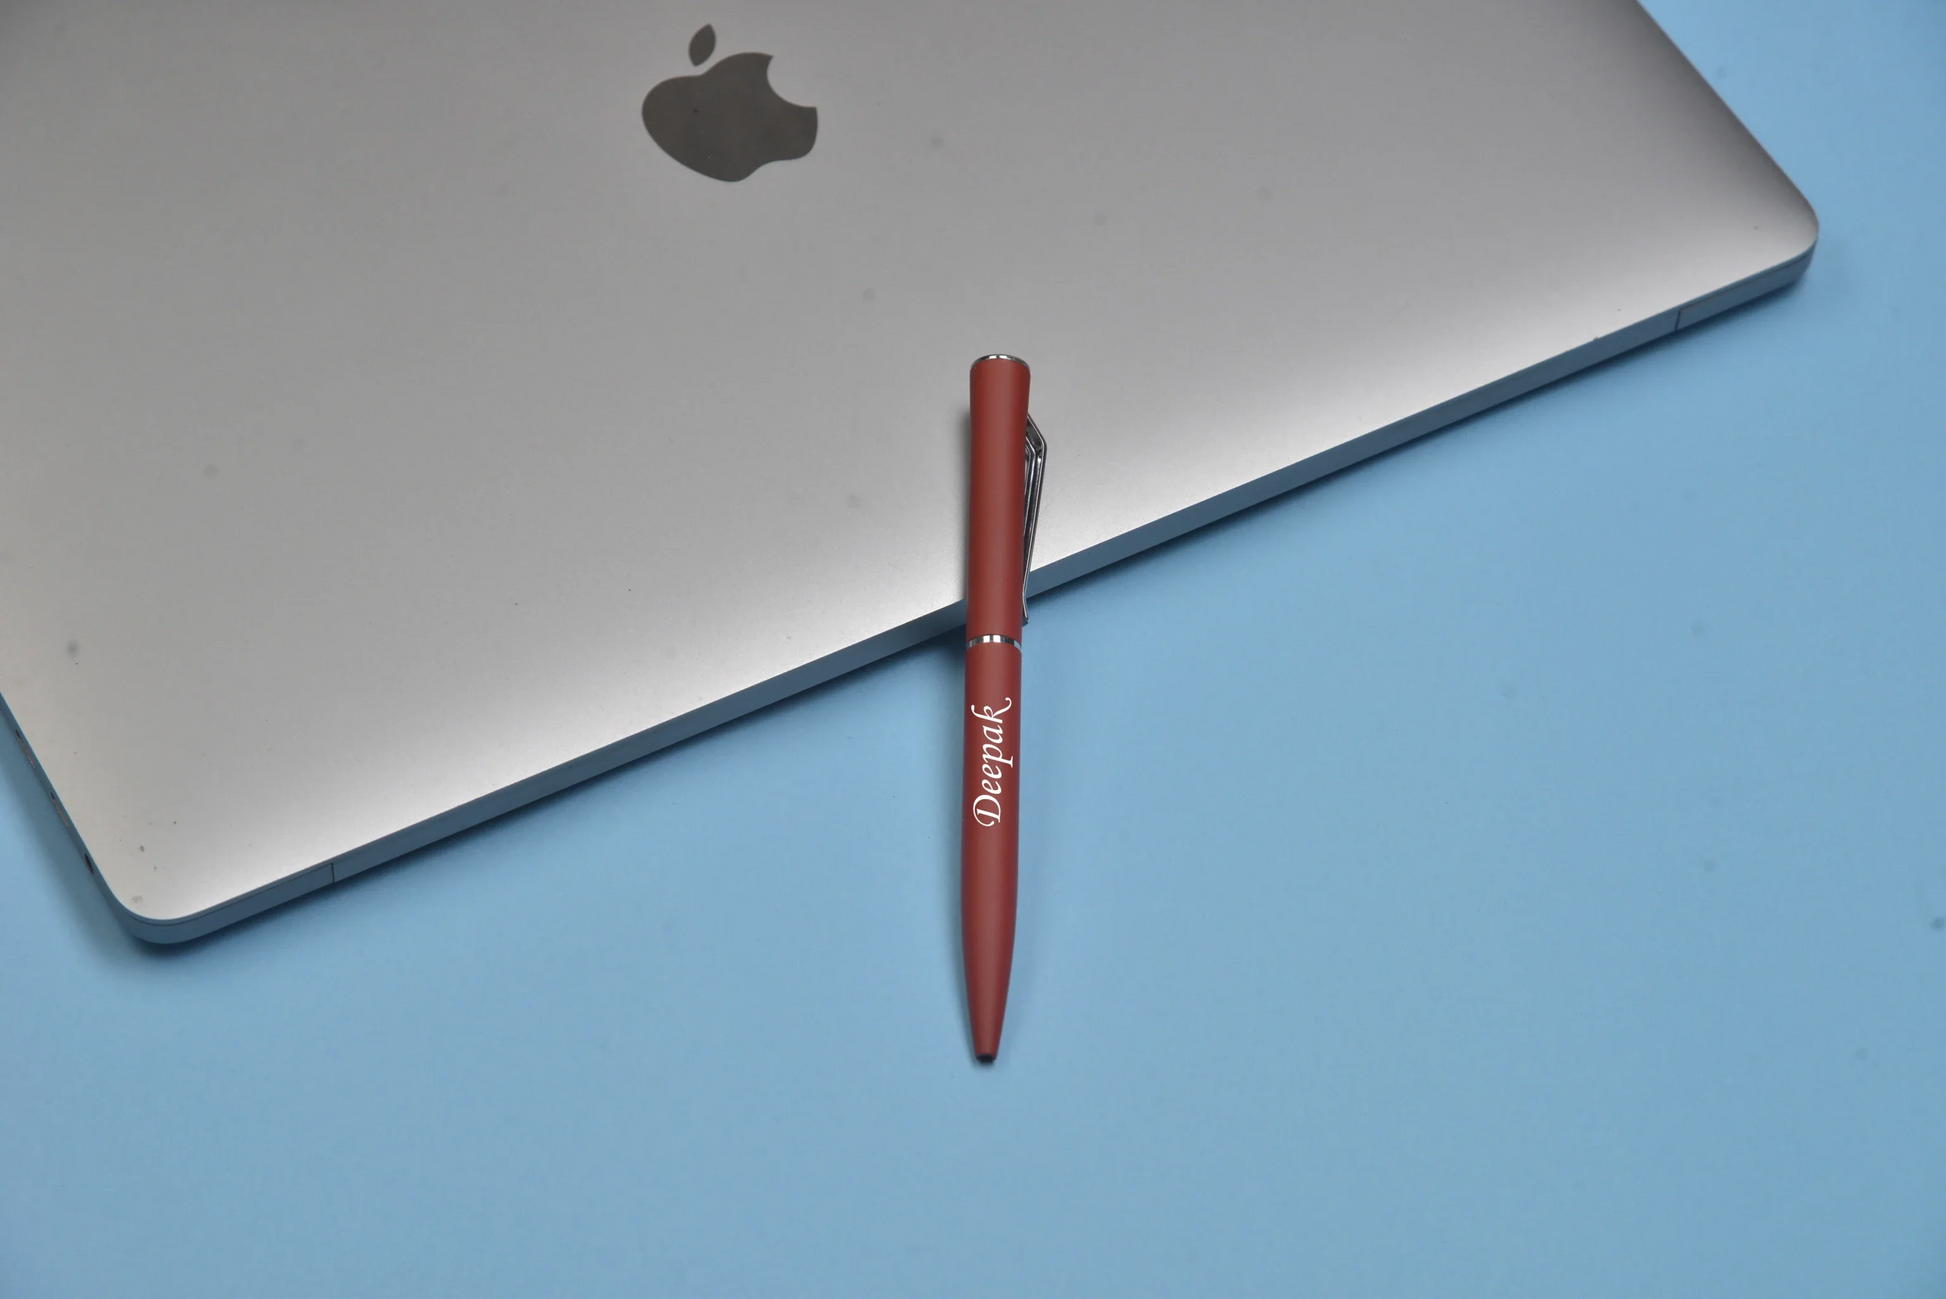 Write in comfort and style with this high-quality metal pen.